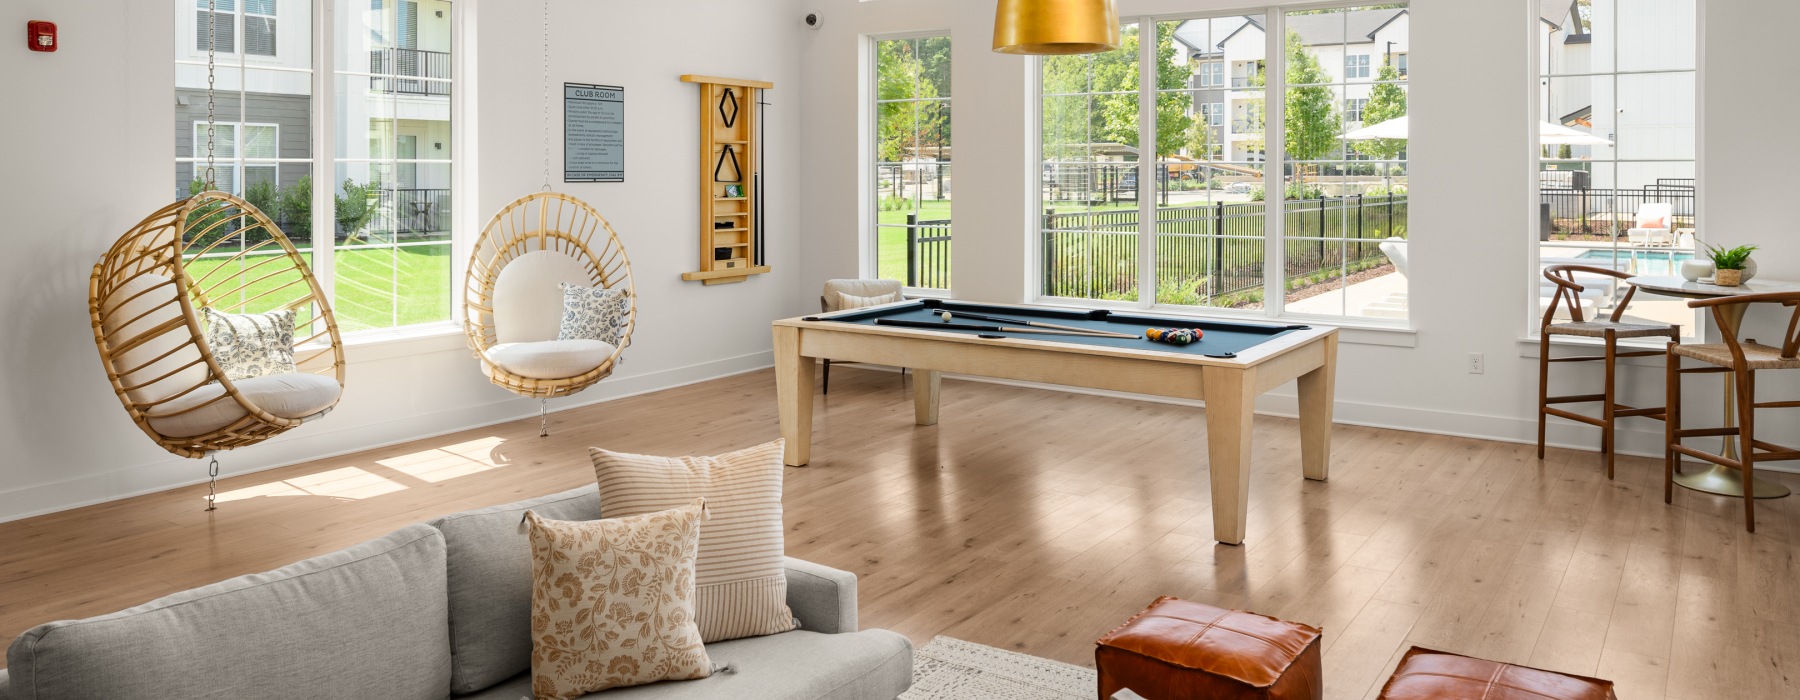 Resident lounge with pool table and hanging chairs